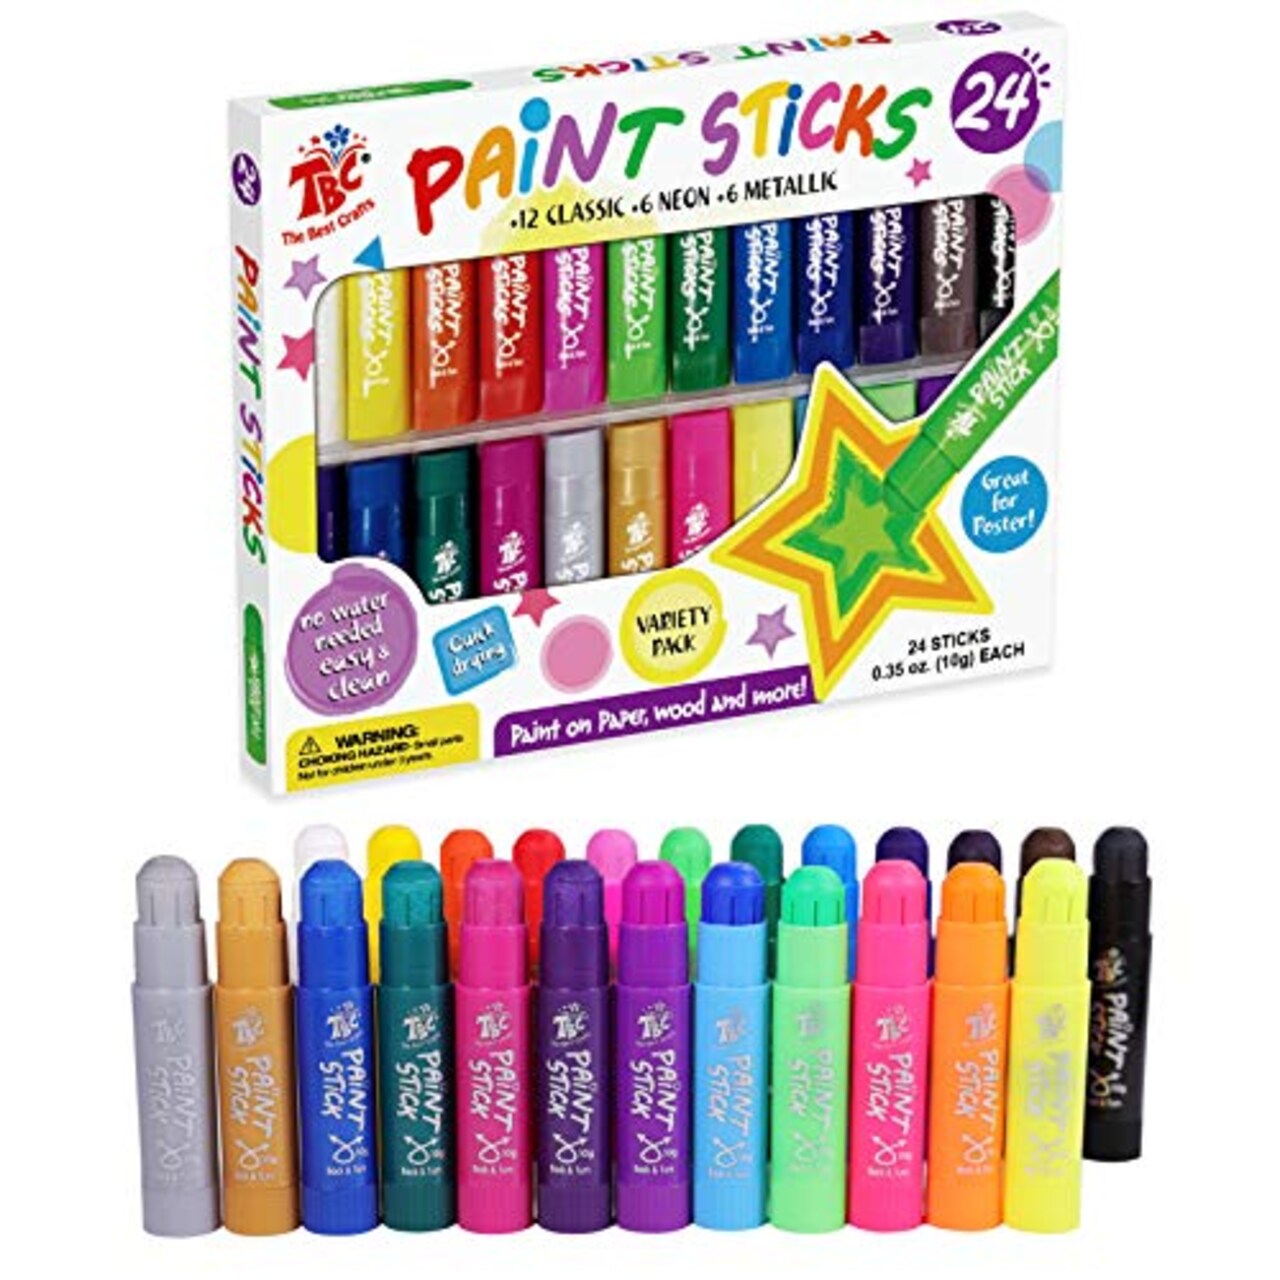 TBC The Best Crafts Paint Sticks,24 Classic Colors, Washable Paint,  Non-toxic, Tempera Paint Sticks for Kids and Students